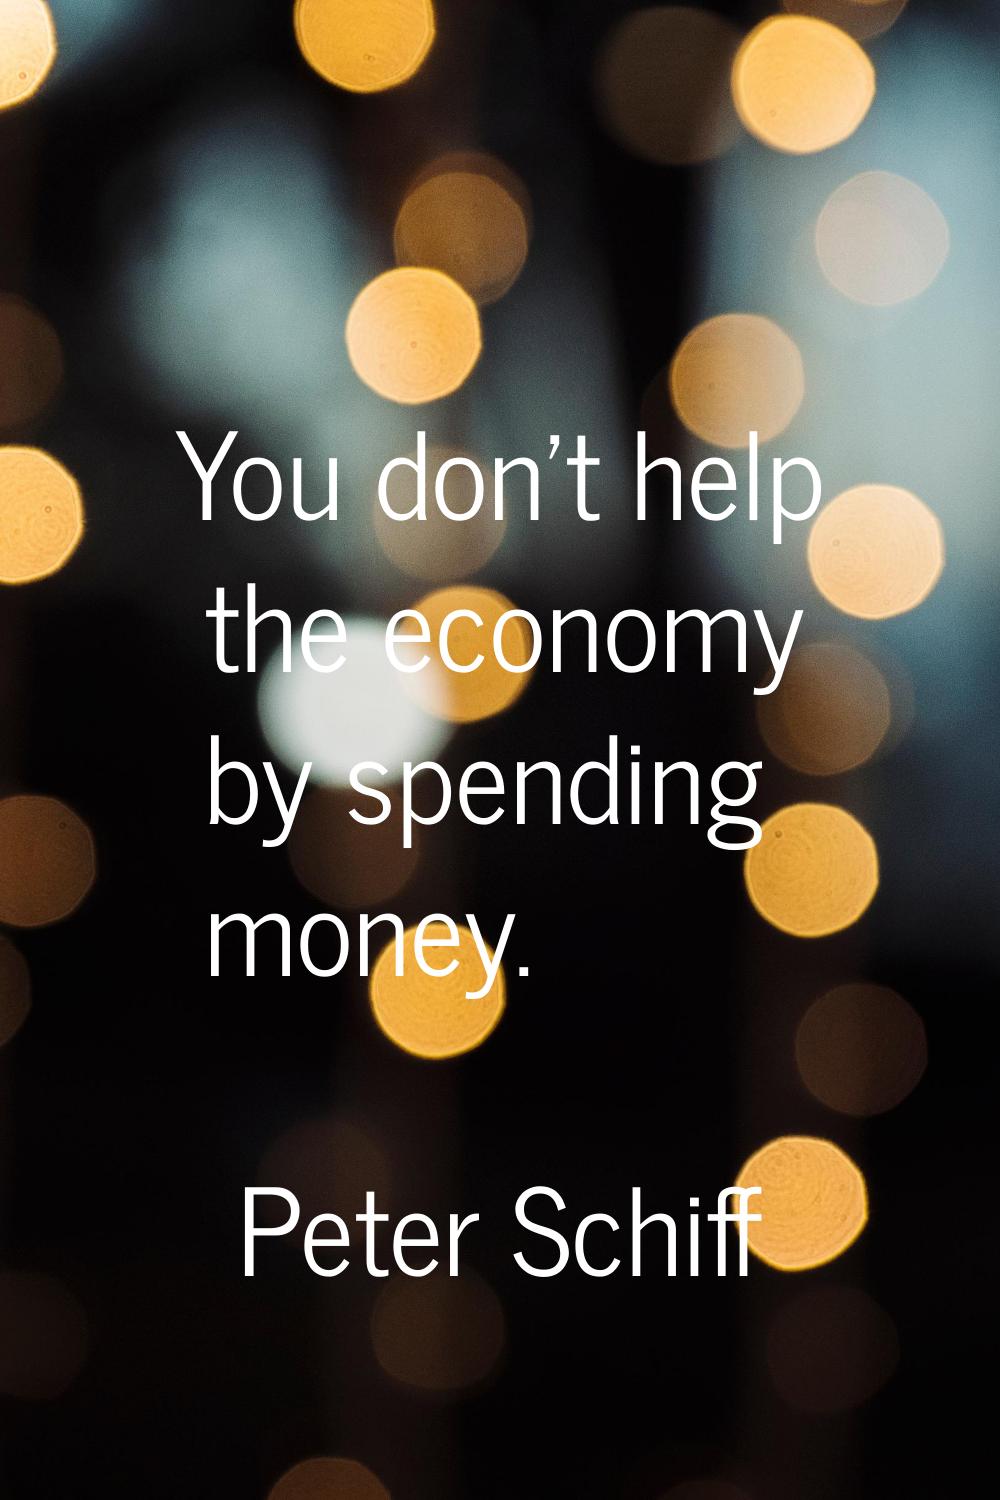 You don't help the economy by spending money.